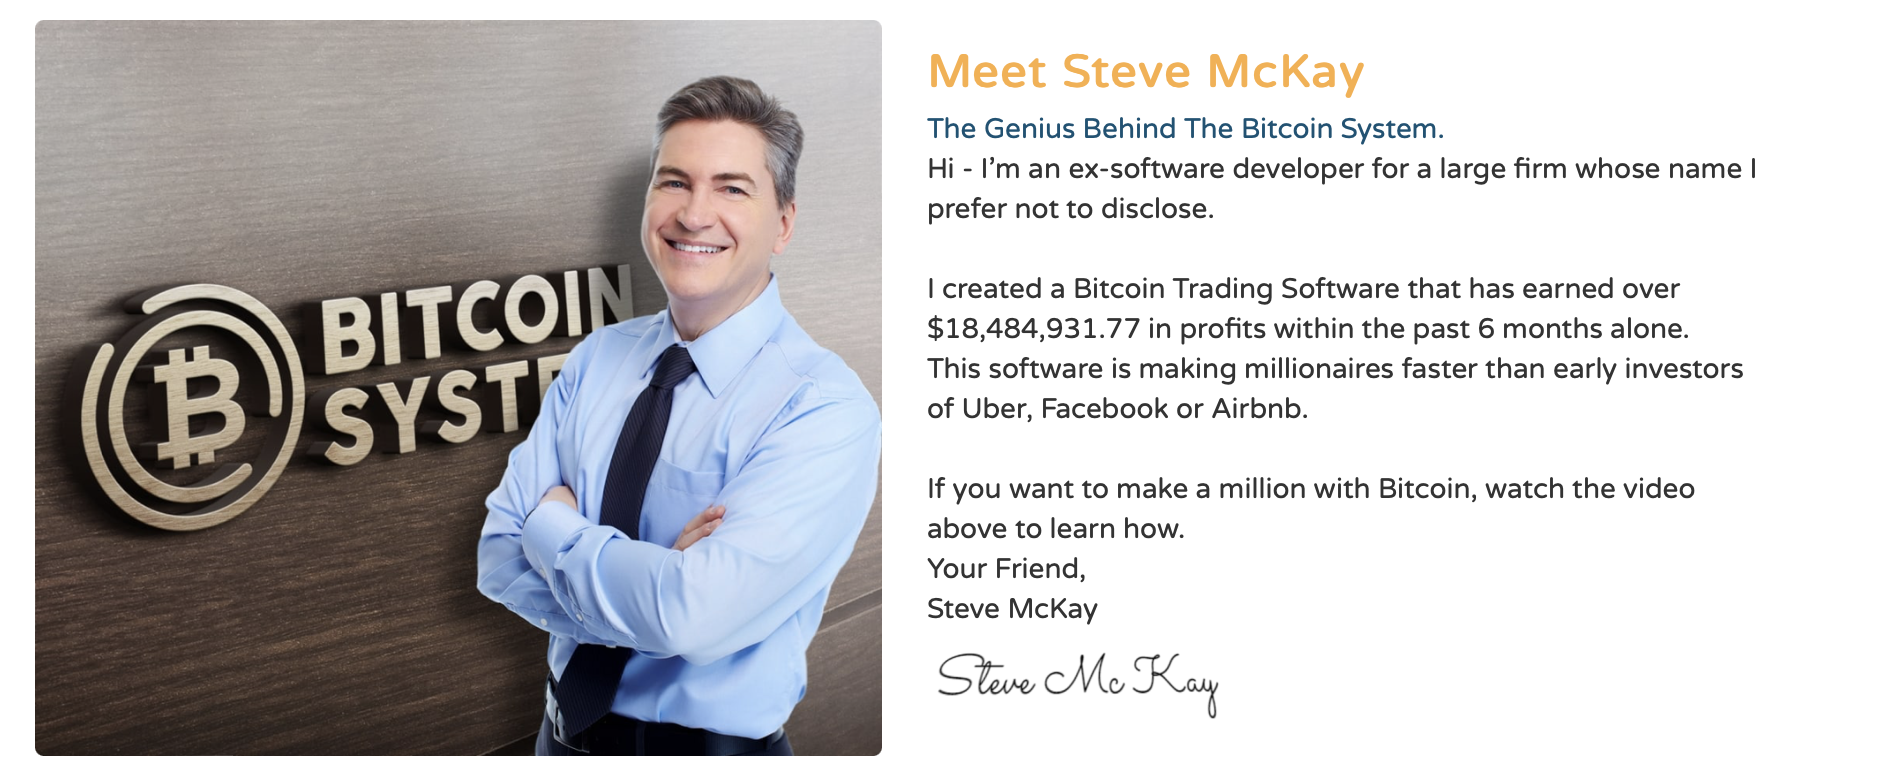 Steve McKay from The Bitcoin System